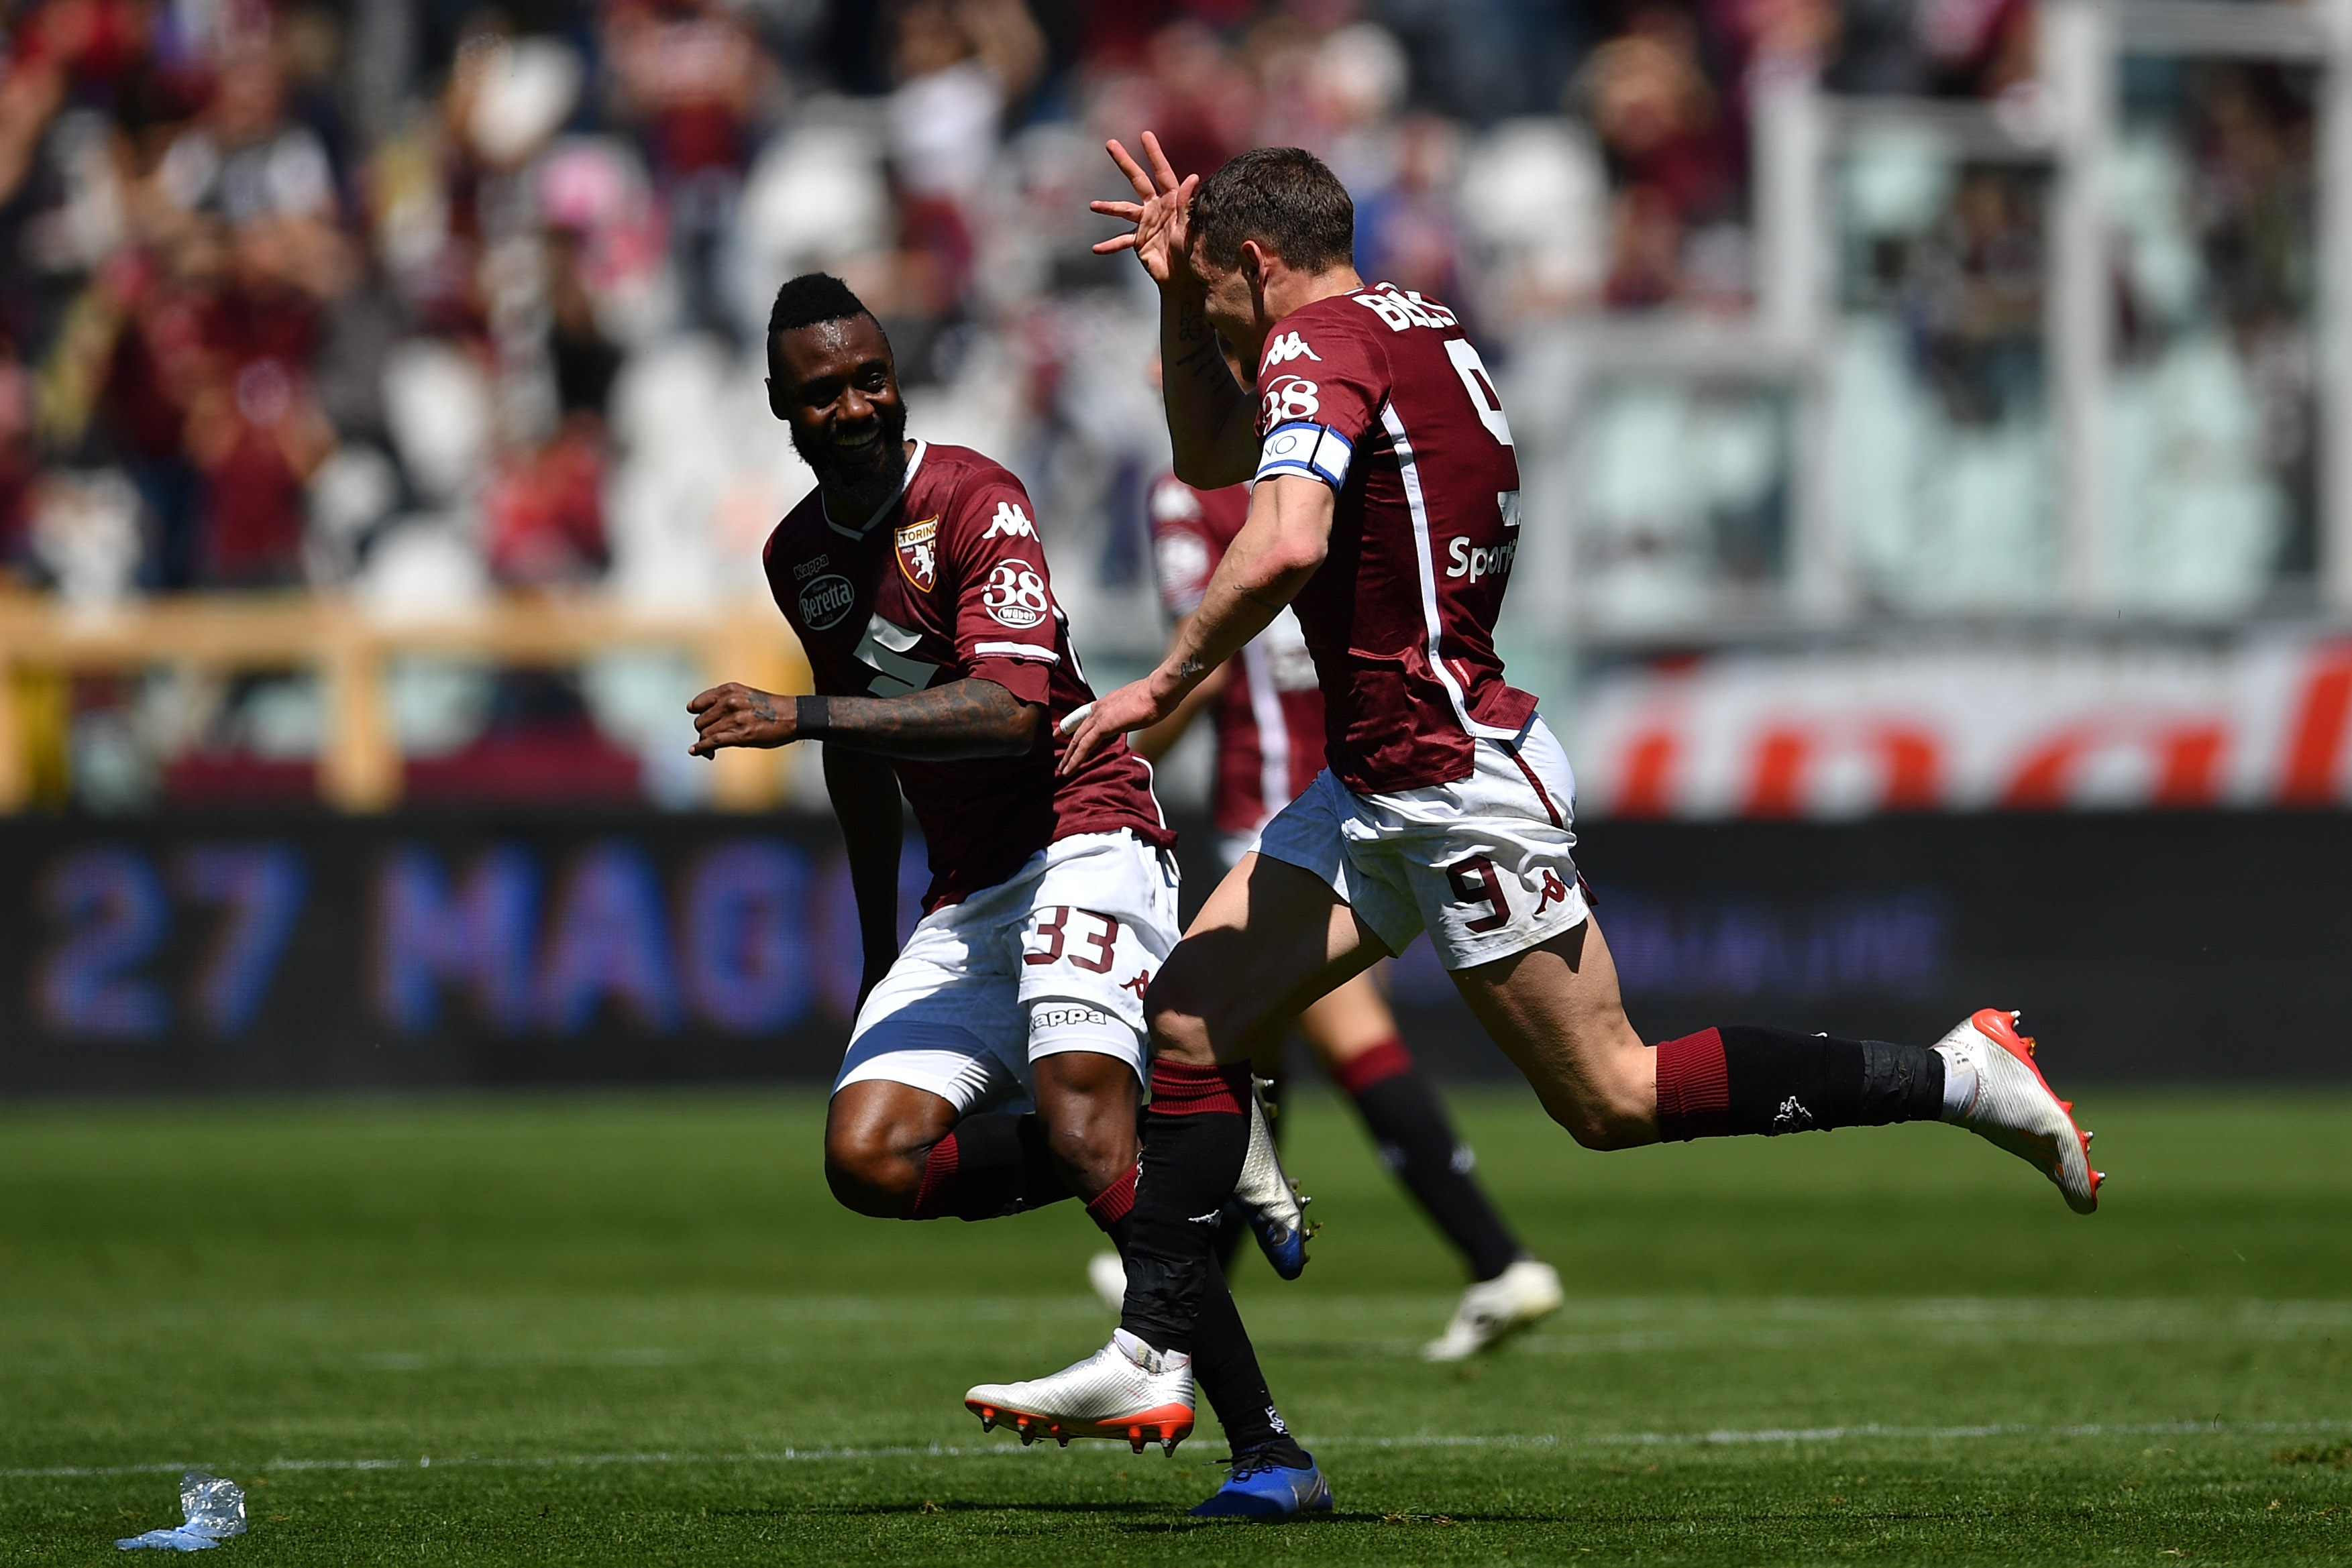 TURIN, ITALY - MAY 12:  Andrea Belotti (R) of Torino FC celebrates a goal during the Serie A match between Torino FC and US Sassuolo at Stadio Olimpico di Torino on May 12, 2019 in Turin, Italy.  (Photo by Valerio Pennicino/Getty Images)